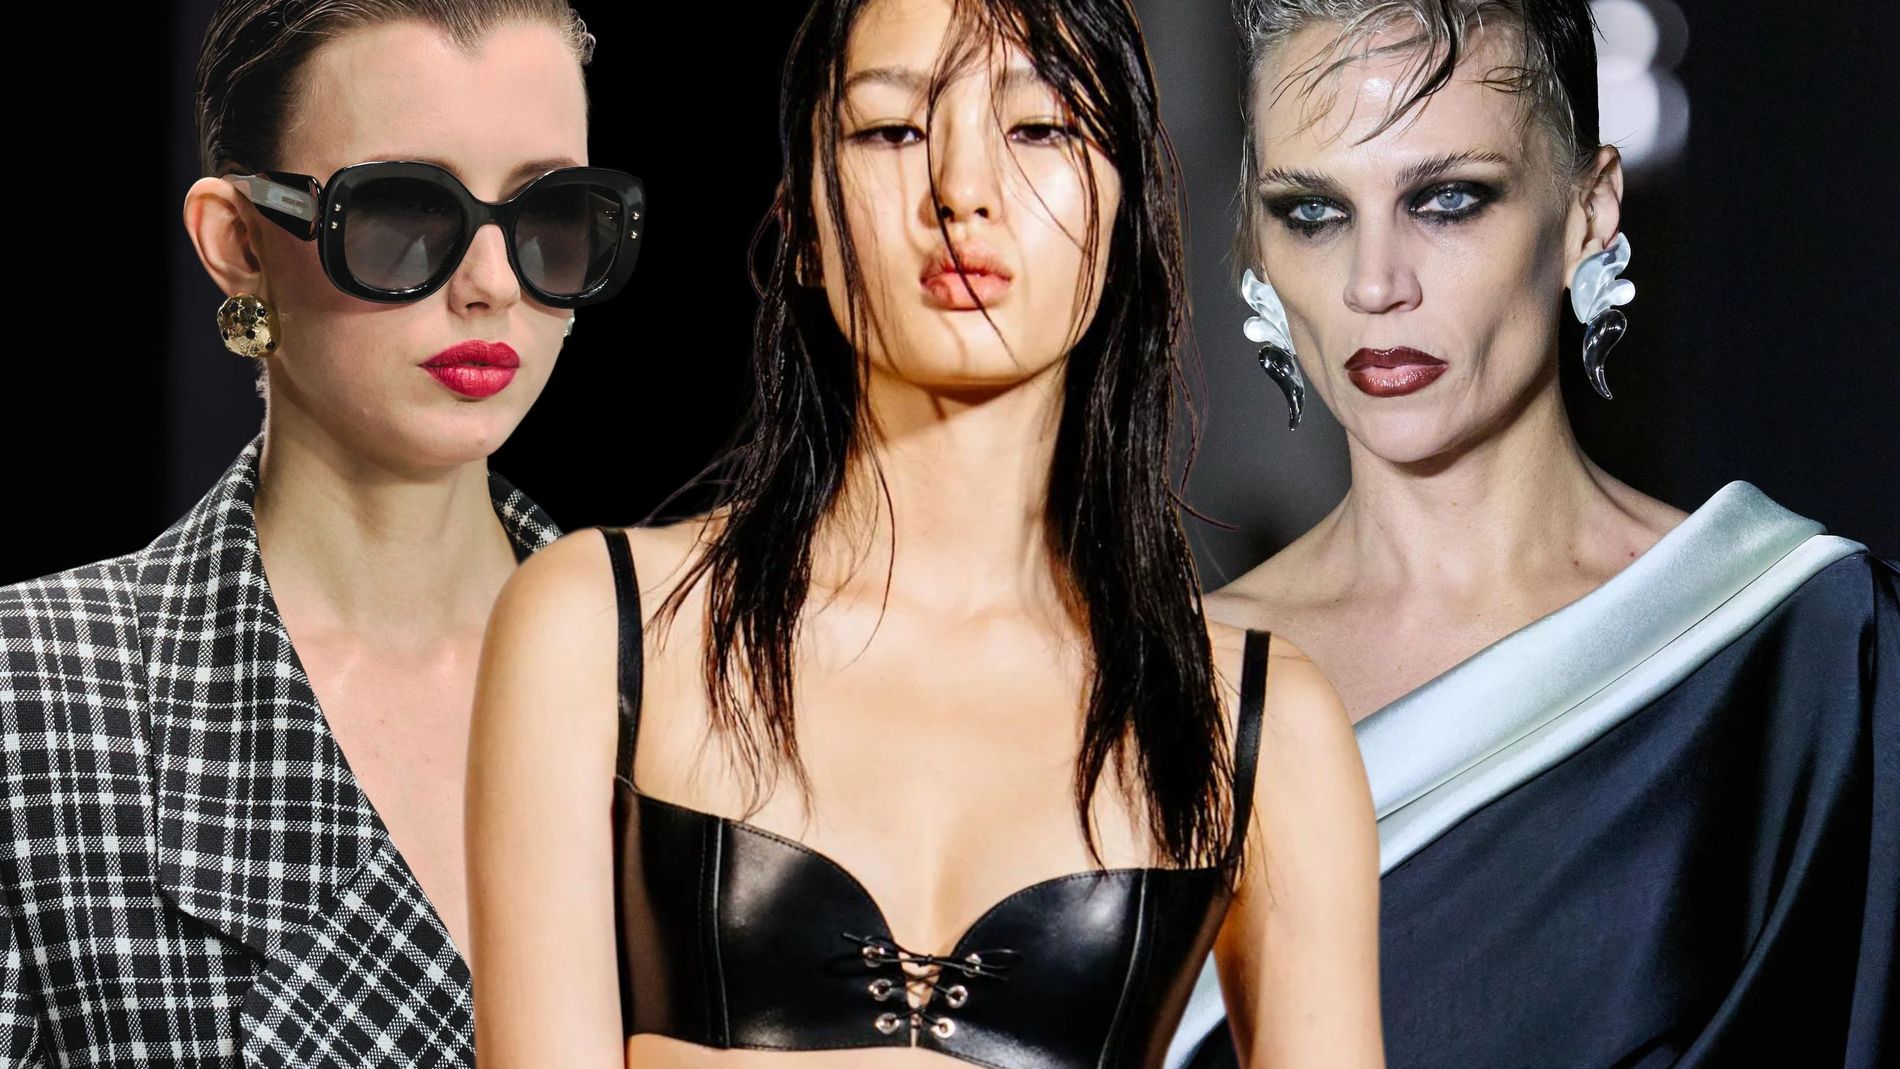 Red lips, black smokey eyes, and copious amount of gel were the three beauty tools in the MUA and hairstylist kit at New York Fashion Week – as exemplified by models walking Michael Kors, Ludovic De Saint Sernin, and Prabal Gurung